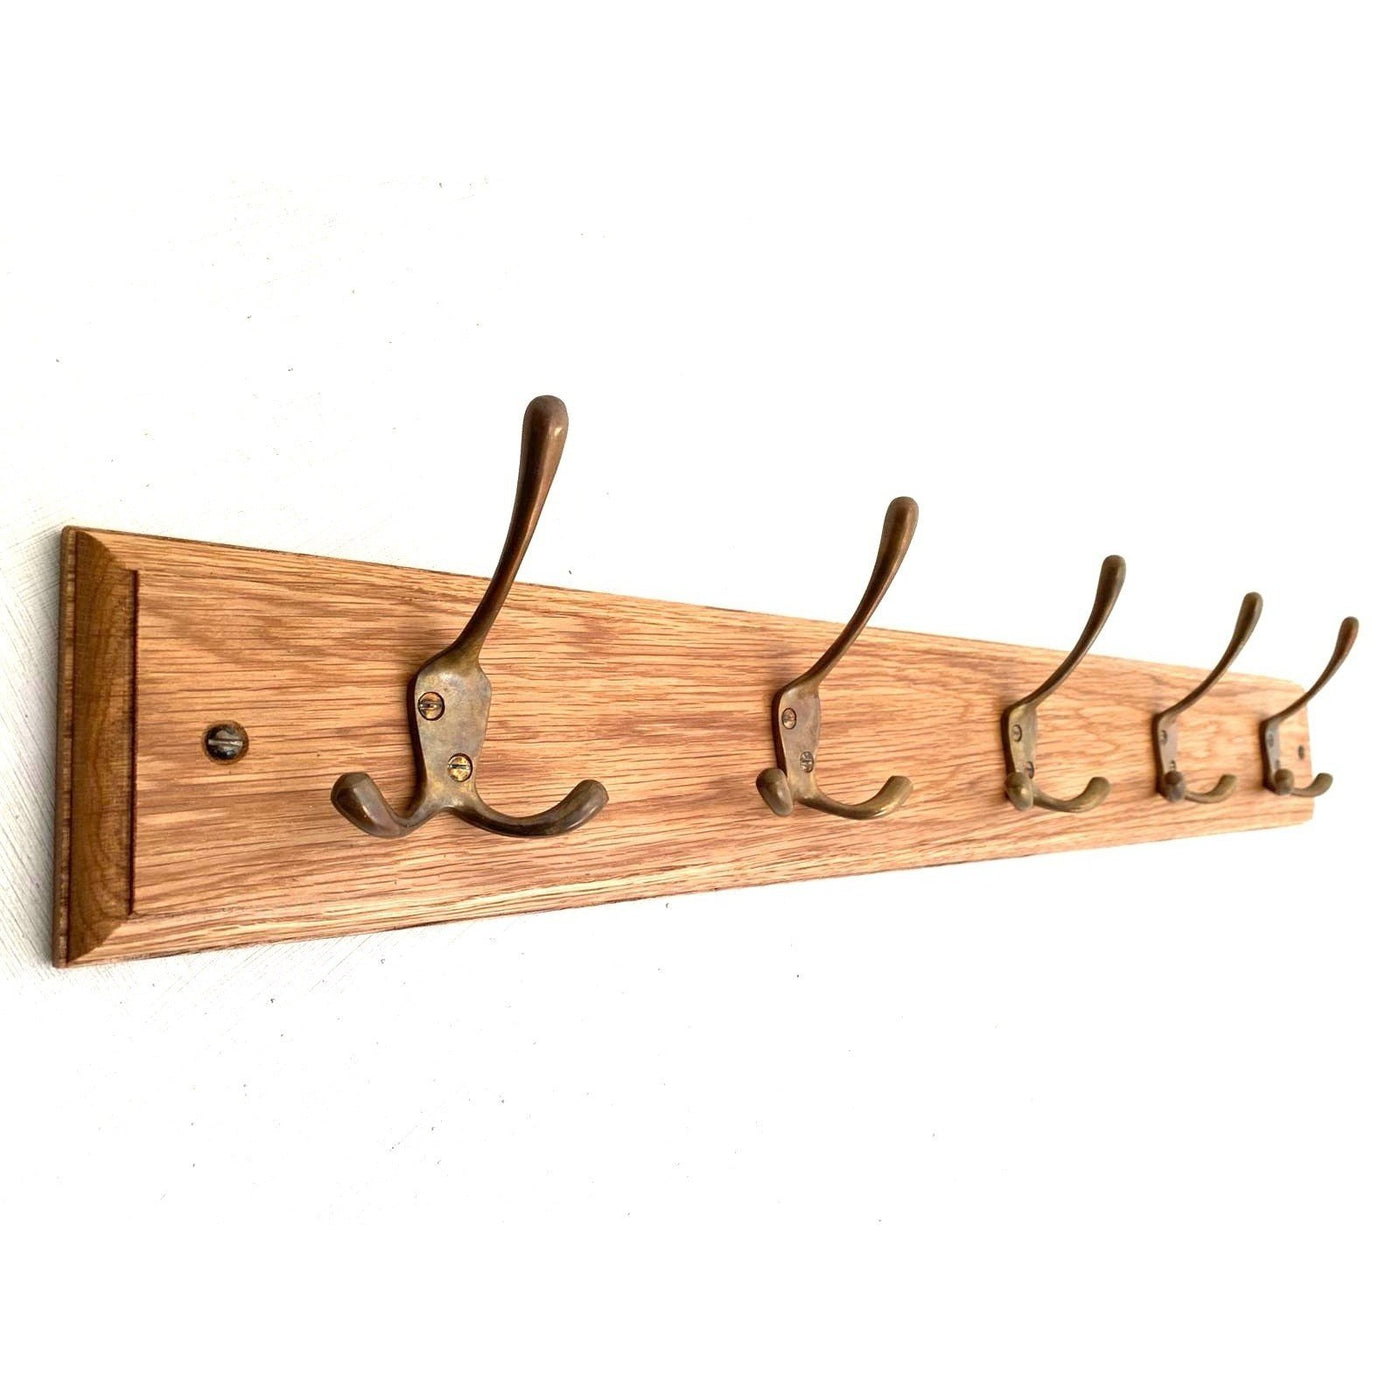 FOWLERS HANDMADE Solid OAK wooden coat rack with Antique finish SOLID BRASS  coat hooks